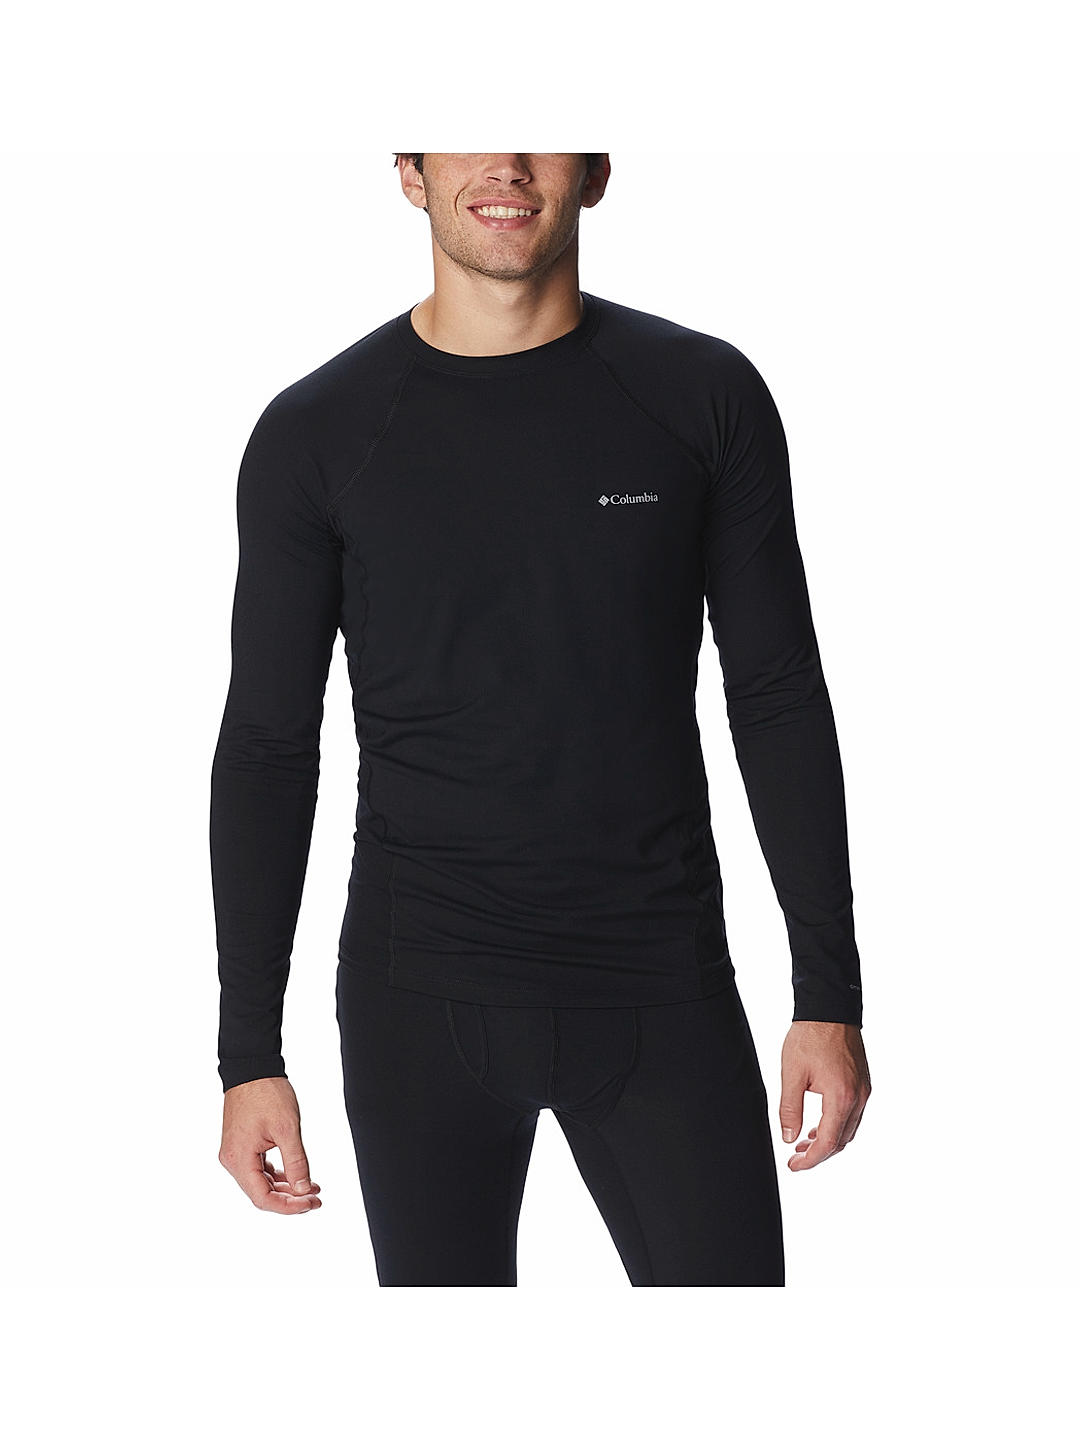 Buy Black Midweight Stretch Long Sleeve Top for Men Online at